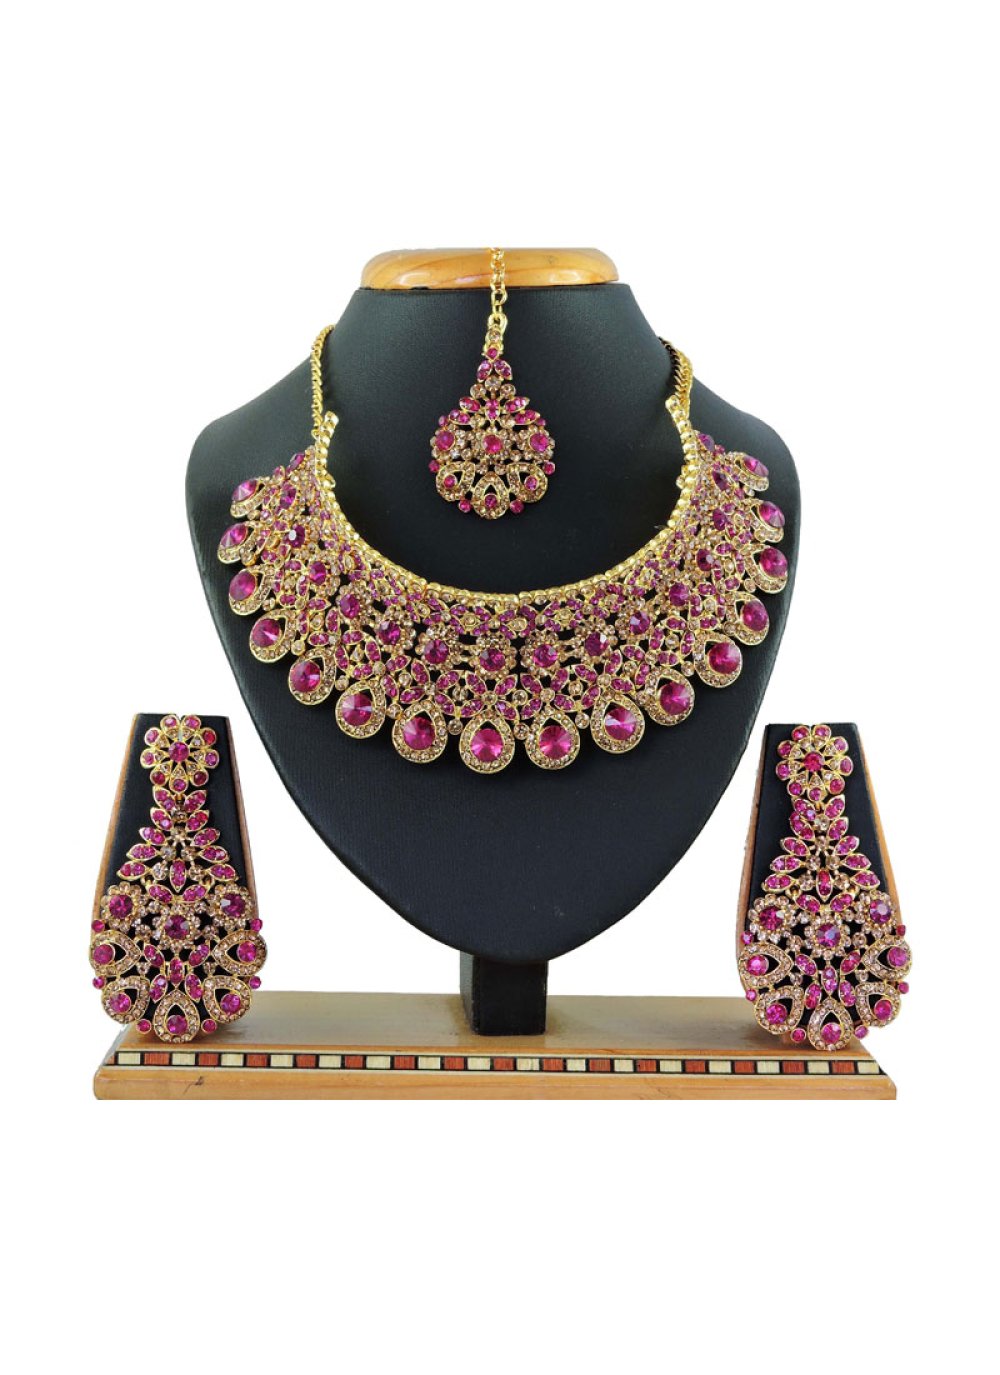 Swanky Fuchsia and Gold Stone Work Necklace Set For Bridal